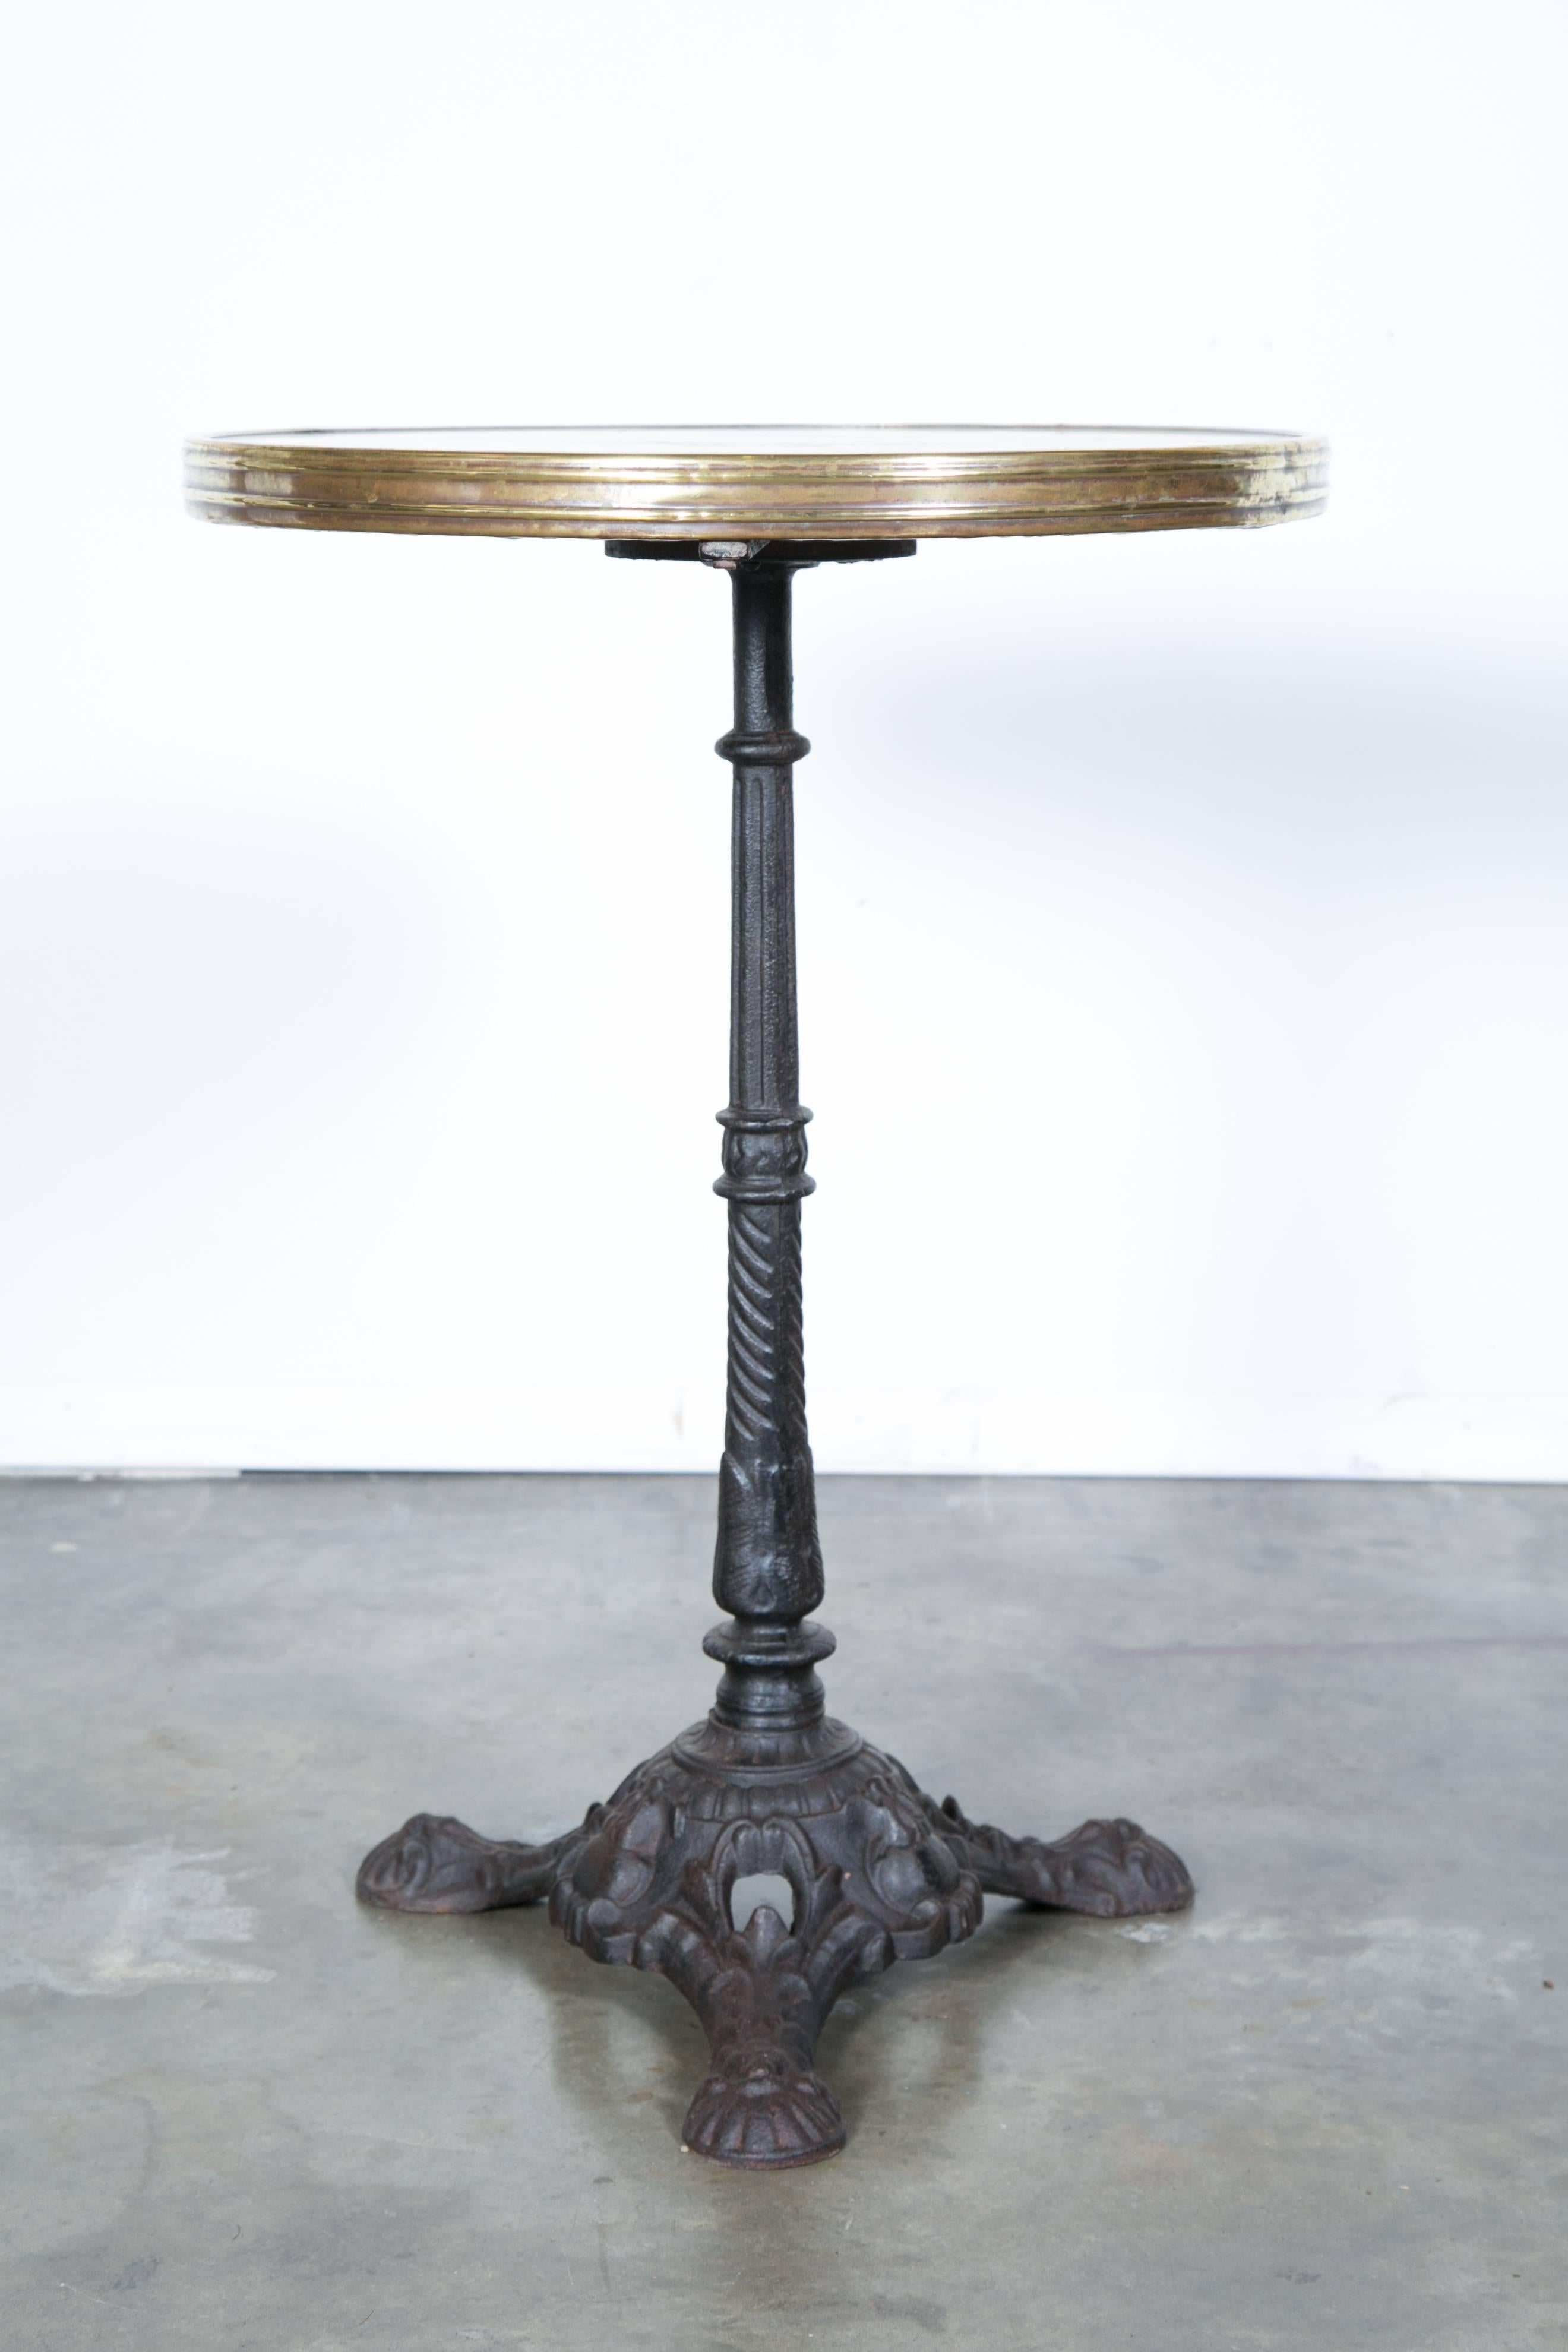 Charming antique Parisian bistro table with a beautiful cast iron base and marble top with brass trim. The iron tripod base is done with a classic styling and a marvelously aged patina. The marble top also boasts a wonderful weathered patina from